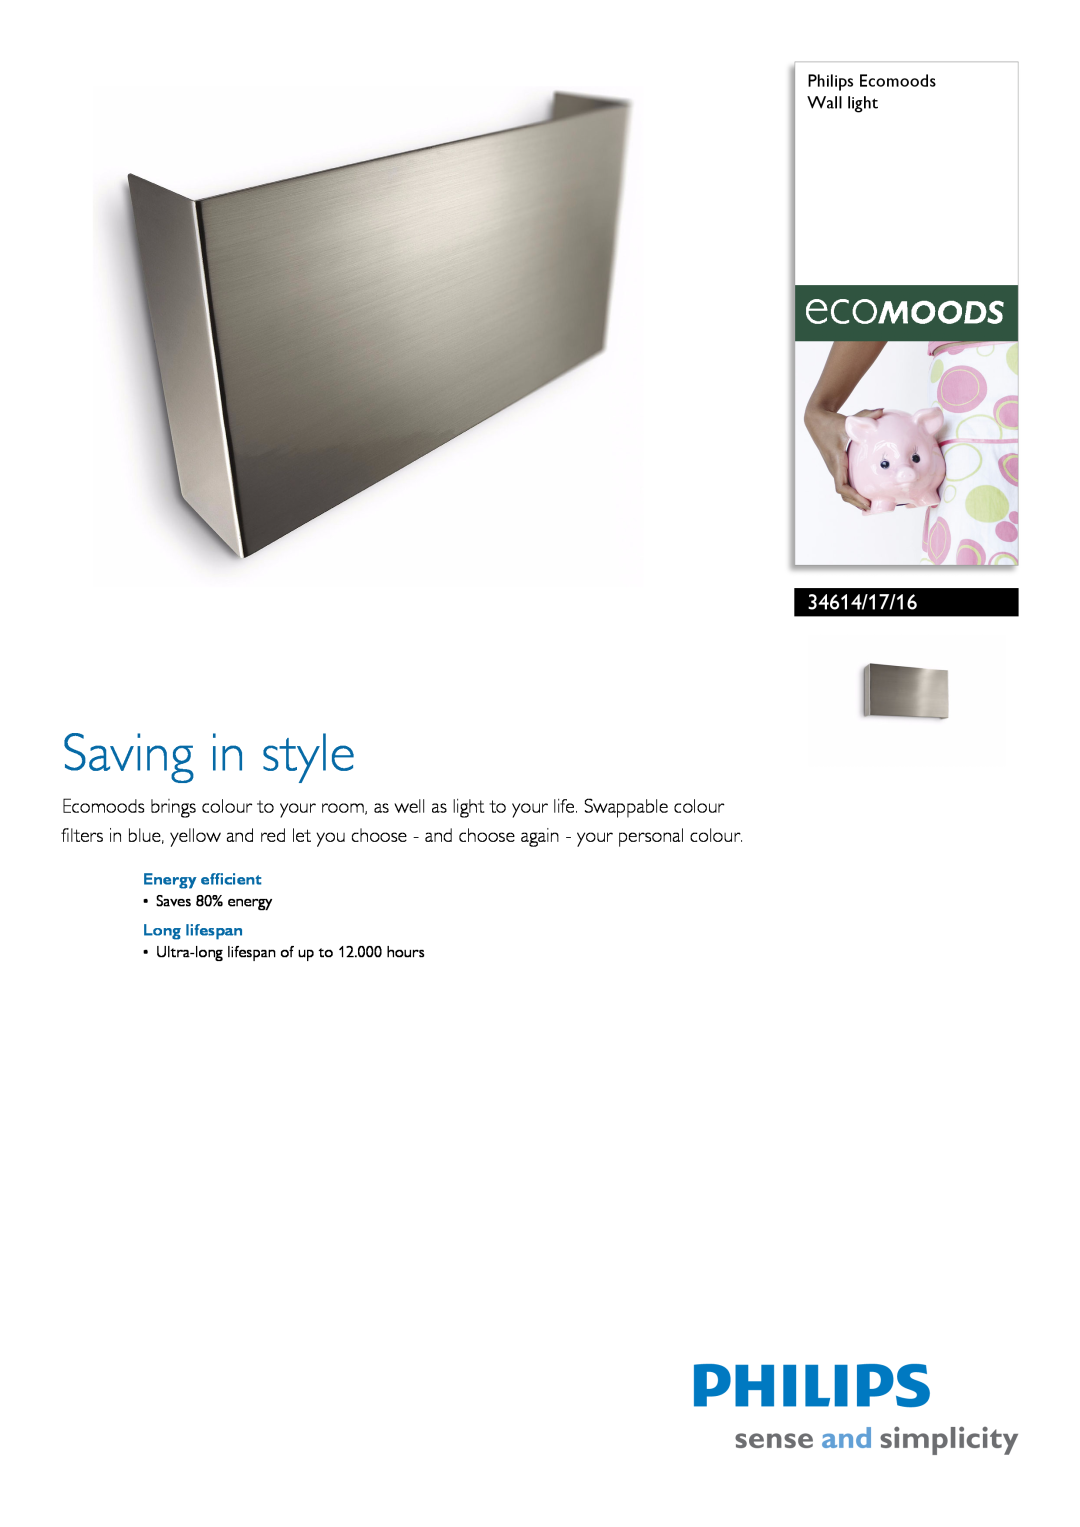 Philips 34614/17/16 manual Philips Ecomoods Wall light, Energy efficient, Long lifespan, Saving in style, Saves 80% energy 